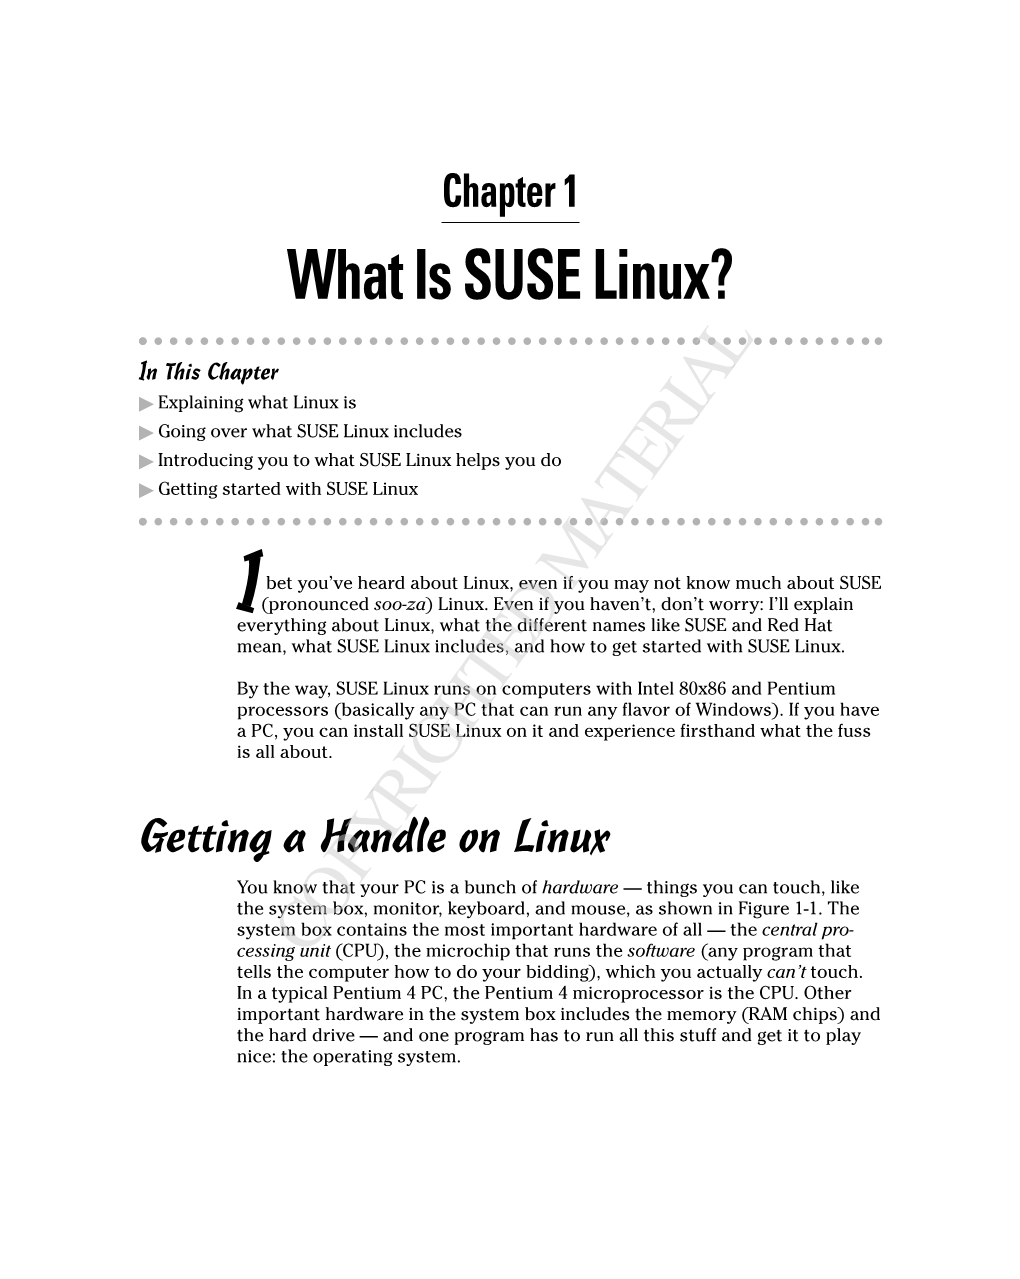 What Is SUSE Linux?